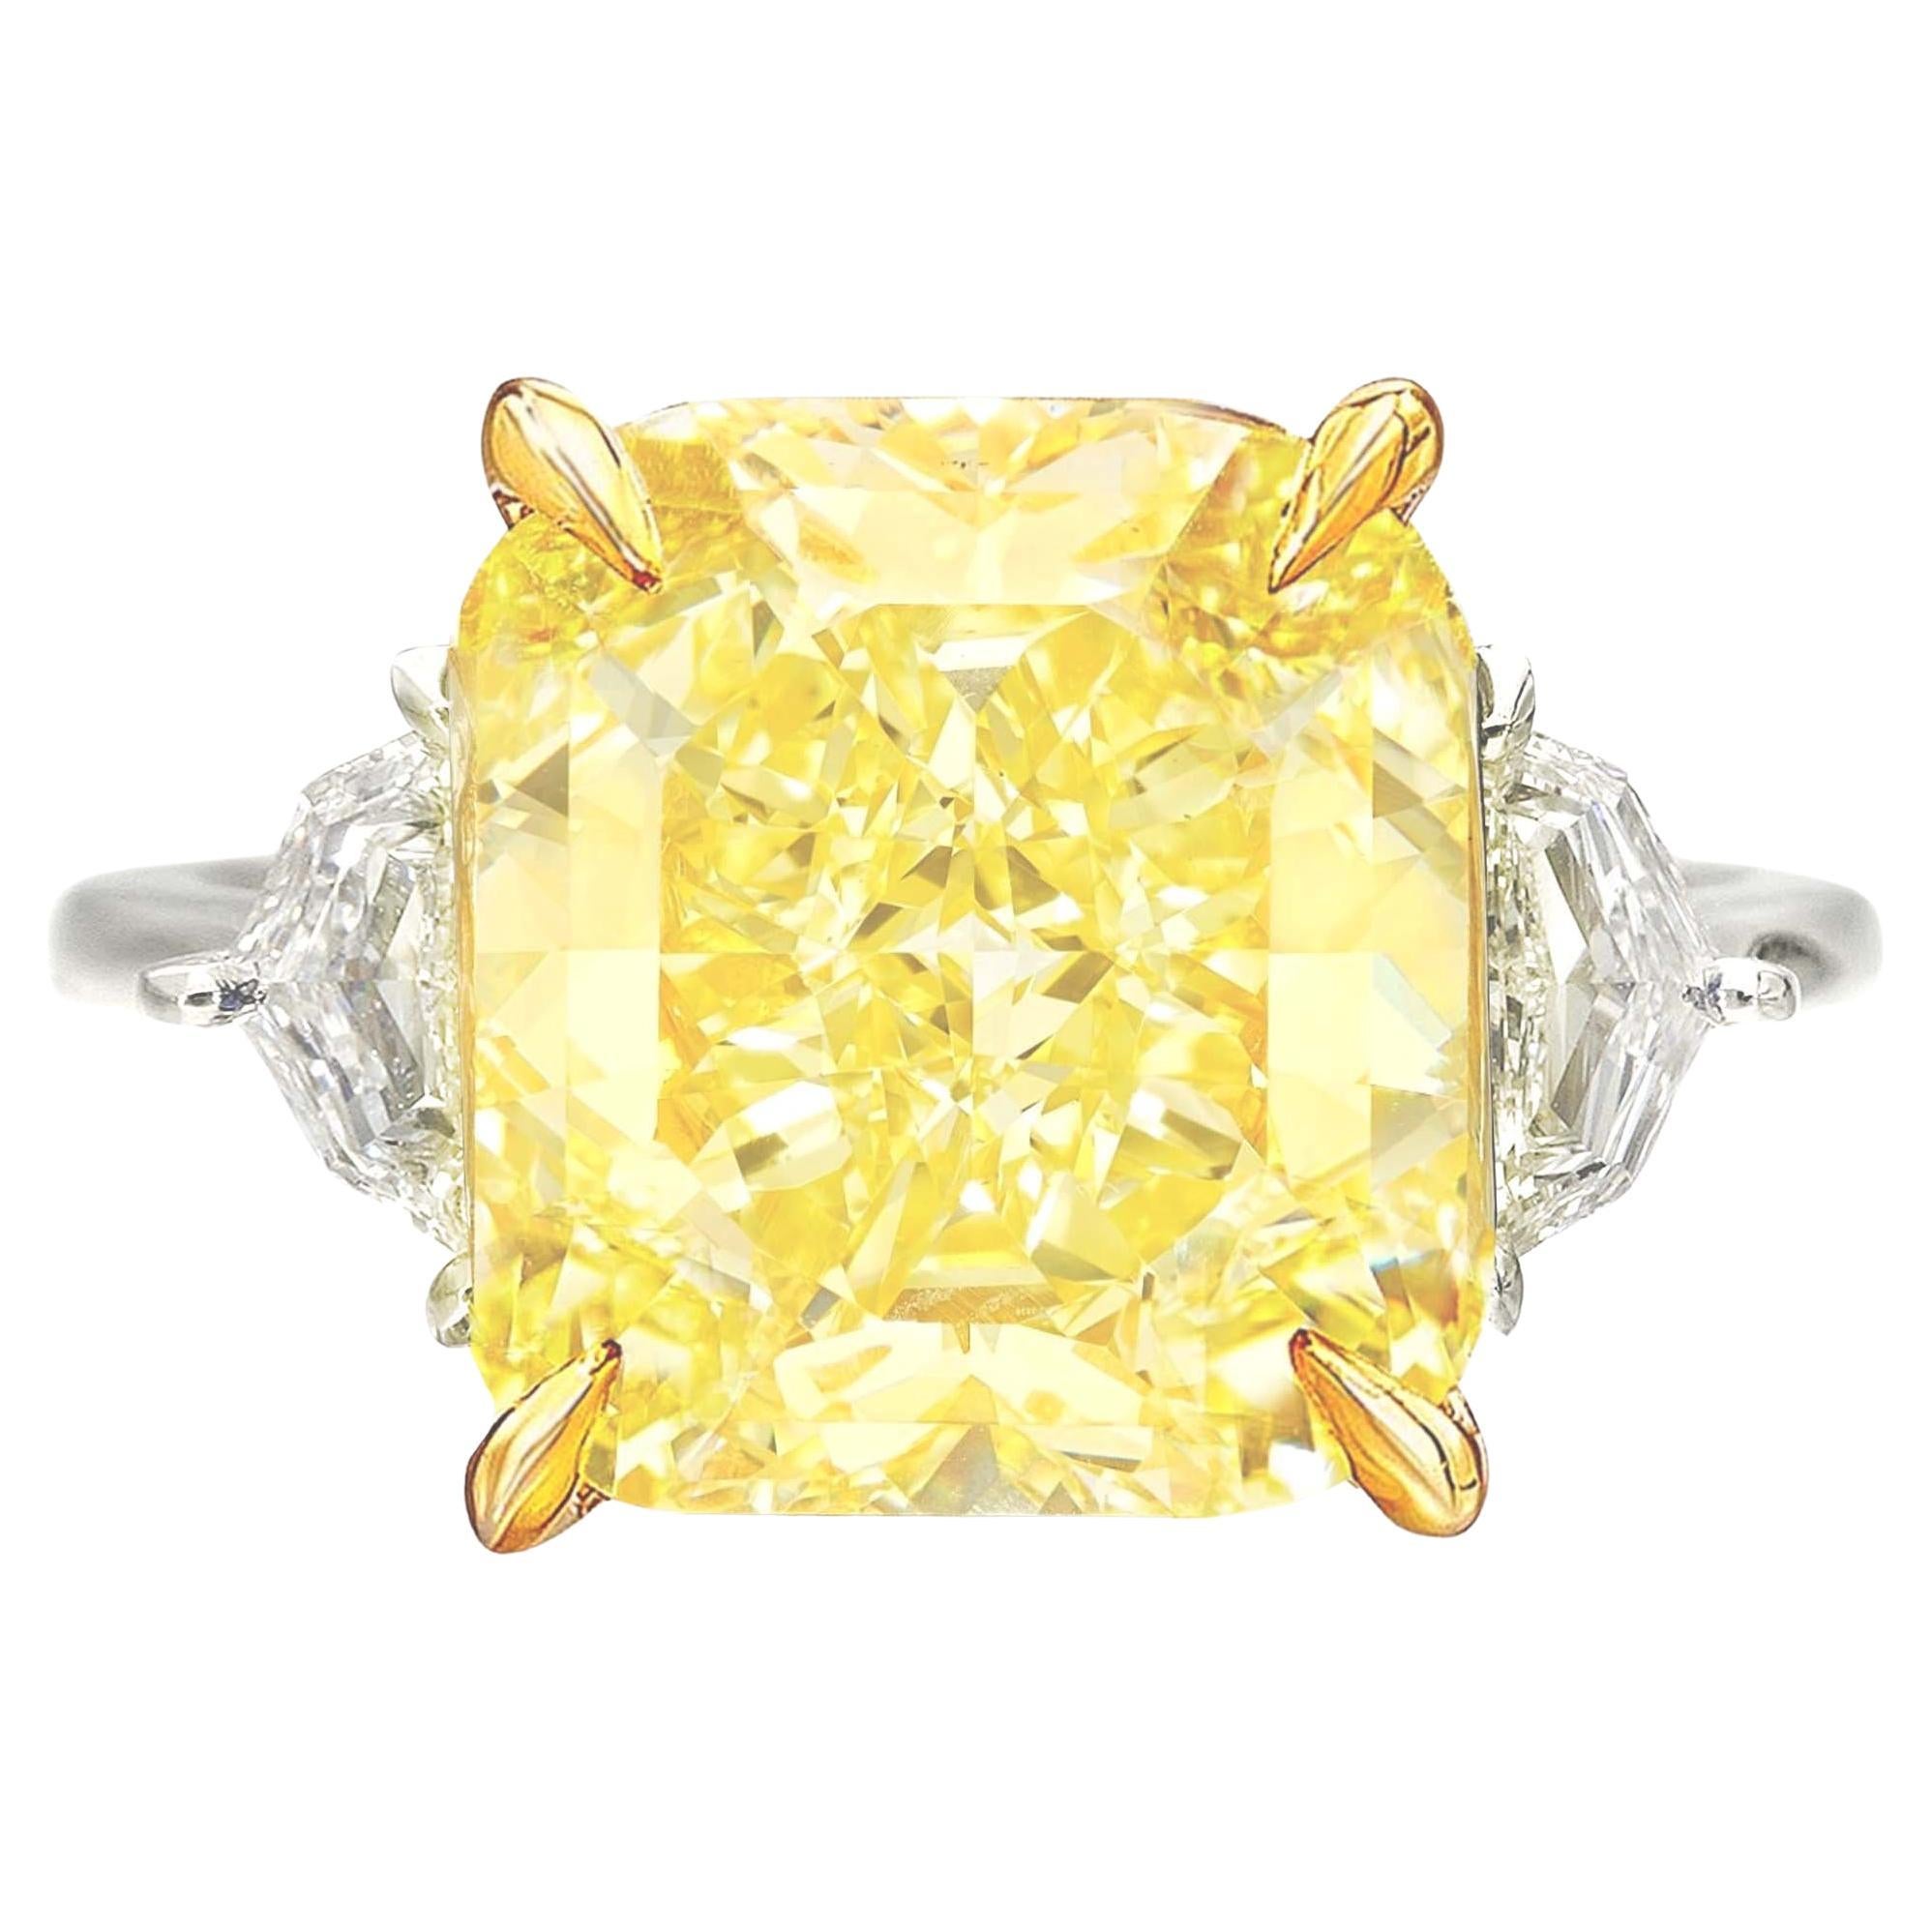 An exquisite 10 carat fancy yellow diamond ring set in platinum and 18 carats yellow gold

the ring has been handmade in Italy with two side tapered baguettes also 100% eye clean and full of brilliance!

